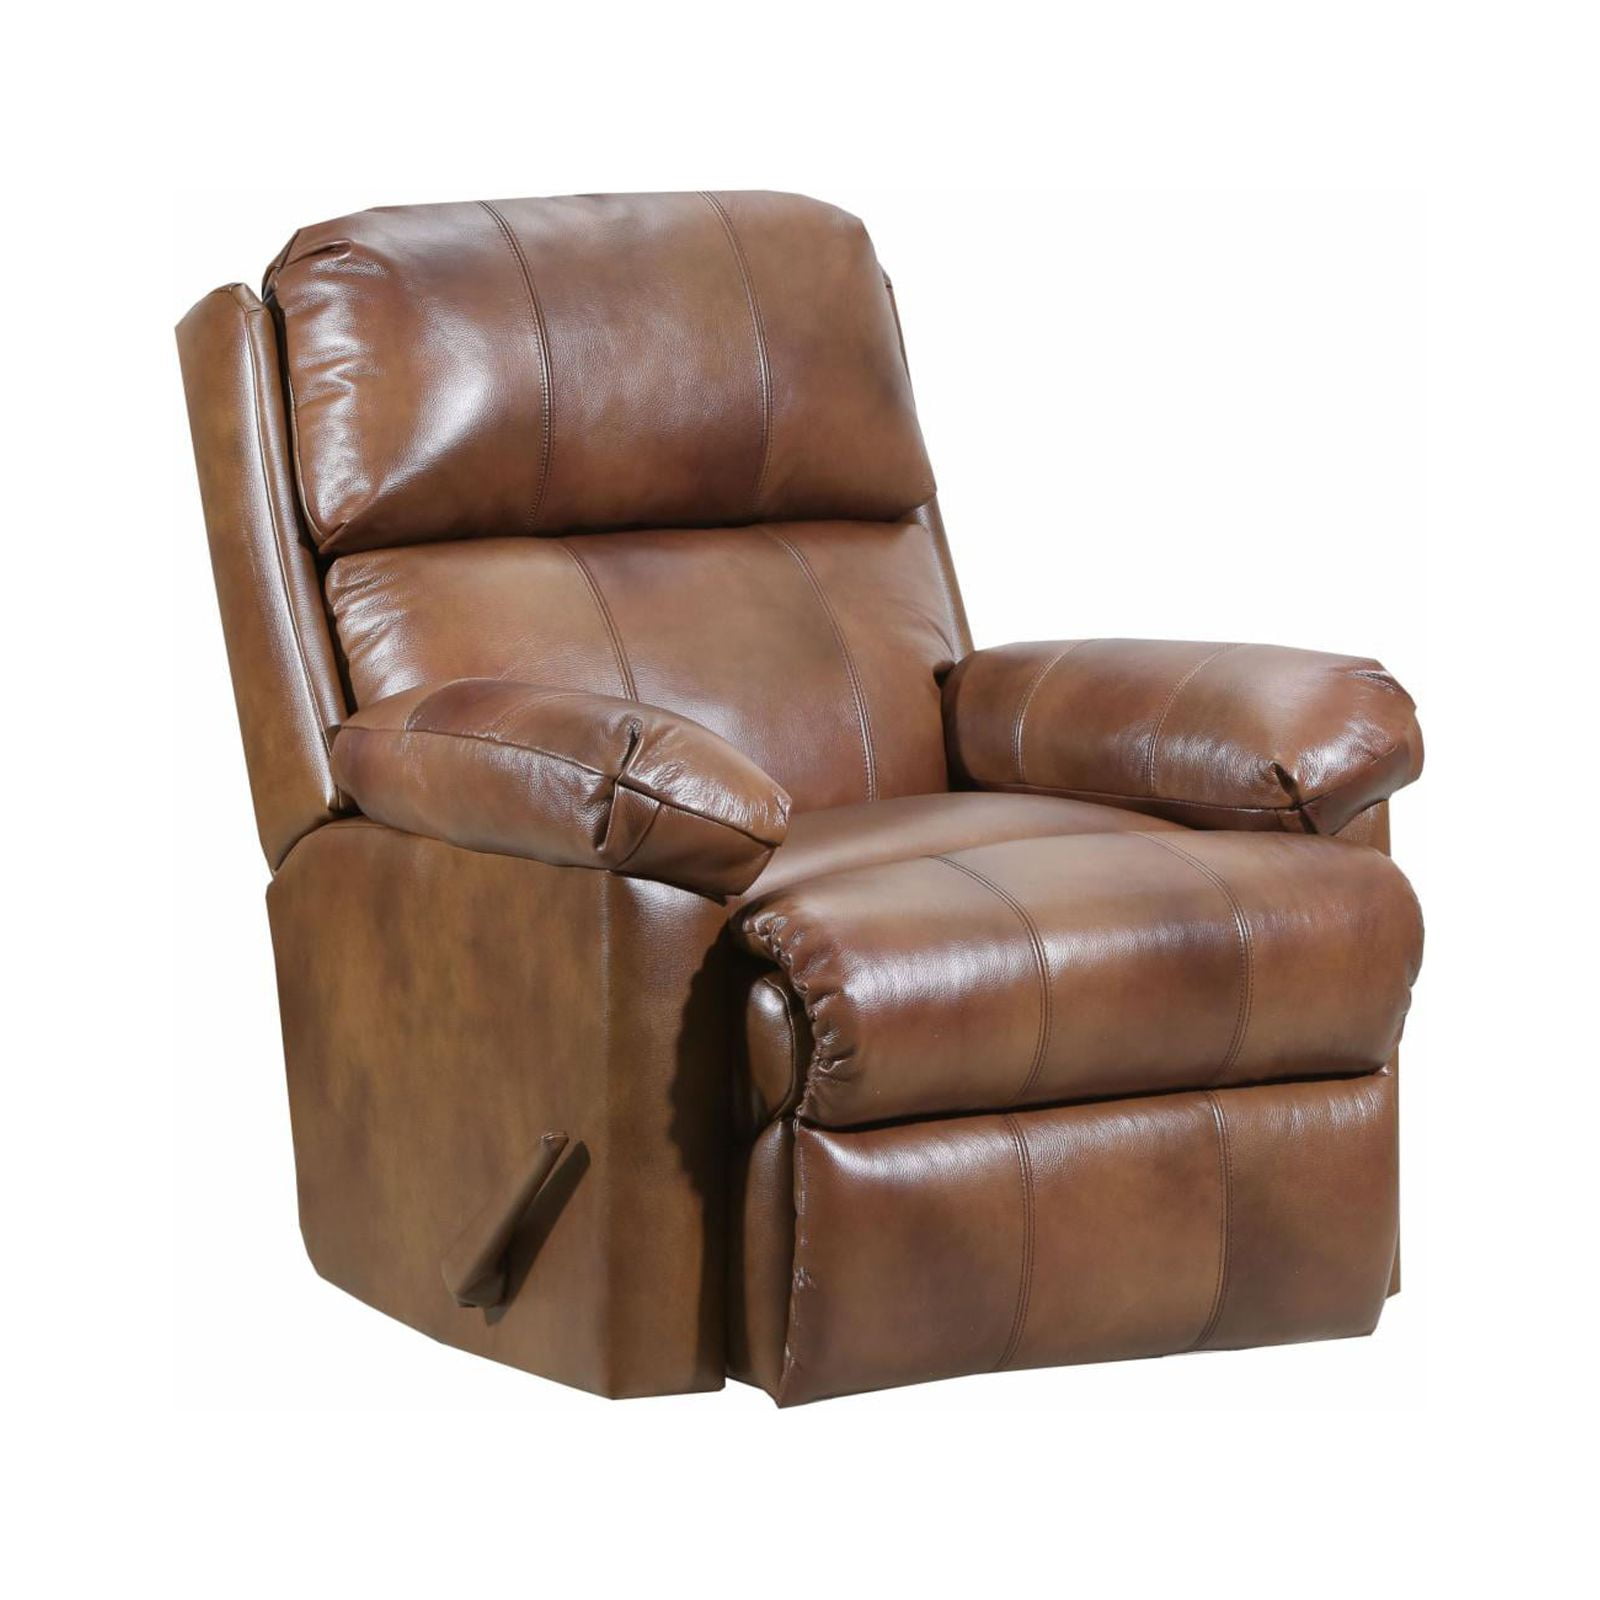 Indulging in Comfort with Lane Furniture Recliners插图3